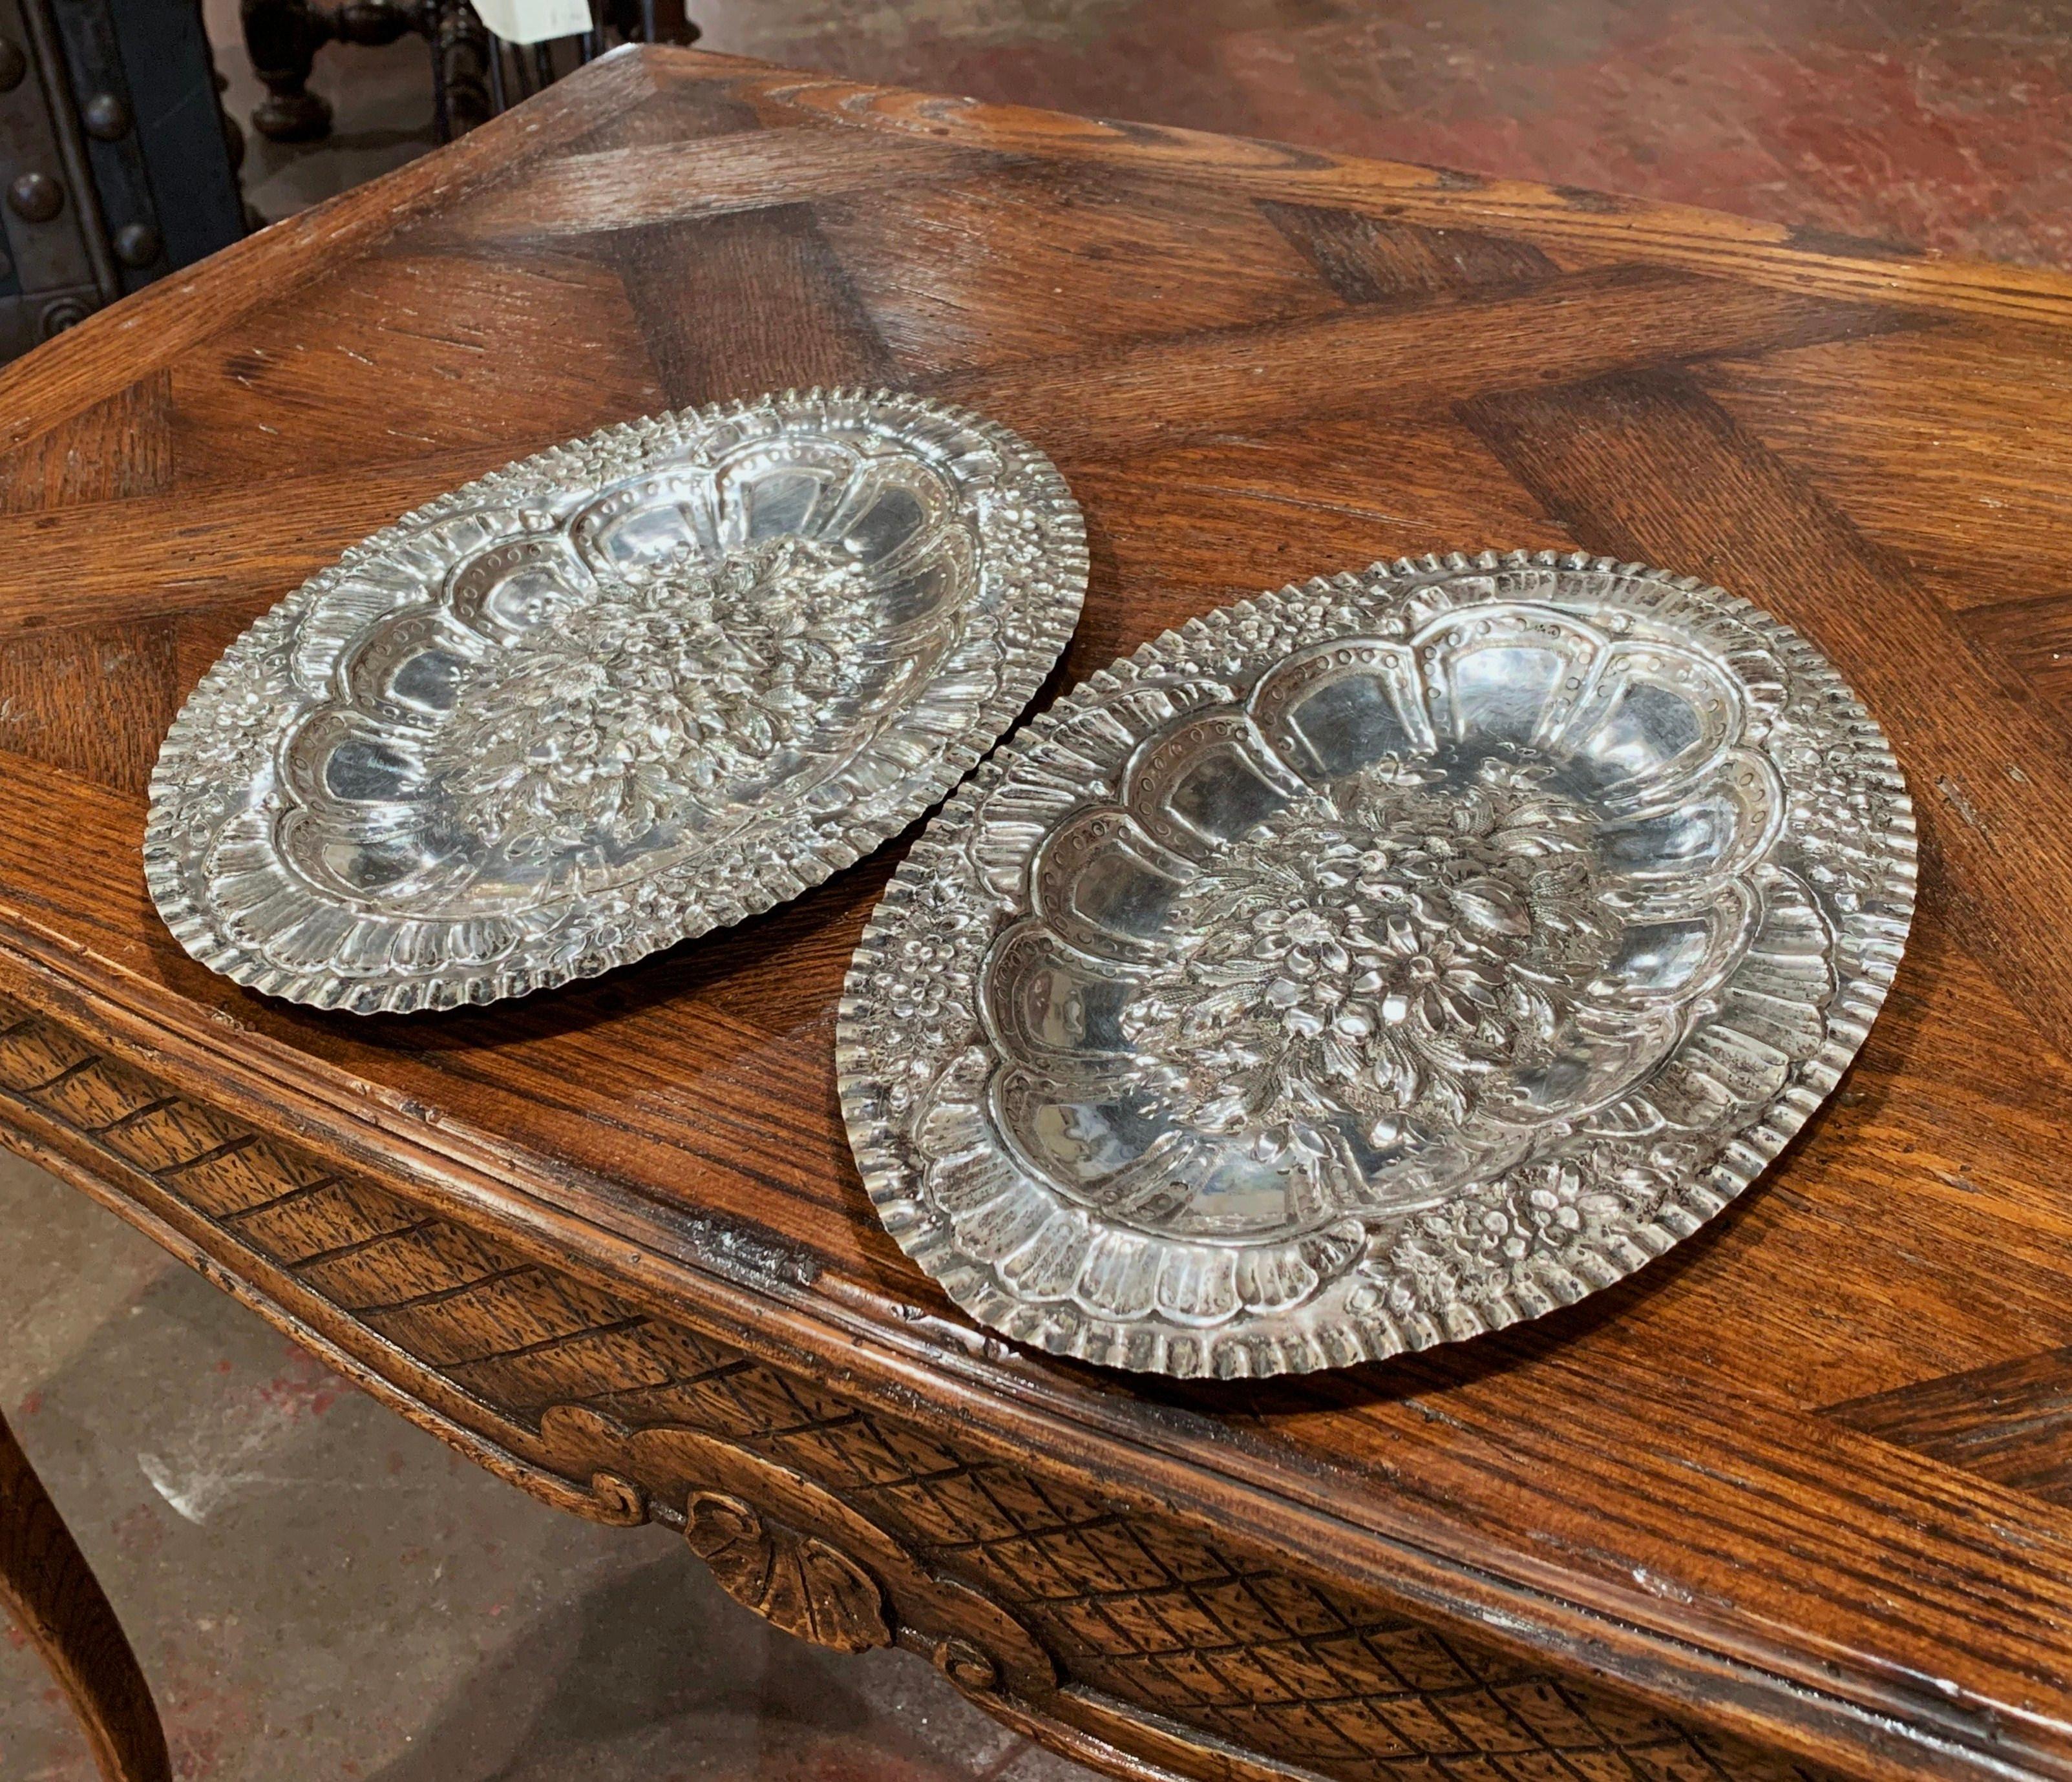 Decorate a wall or a shelf with this pair of highly detailed, antique wall plaques. Crafted in France circa 1880, each oval plaque features a large repousse floral medallion in the center, and is embellished with leaf and floral decor around the